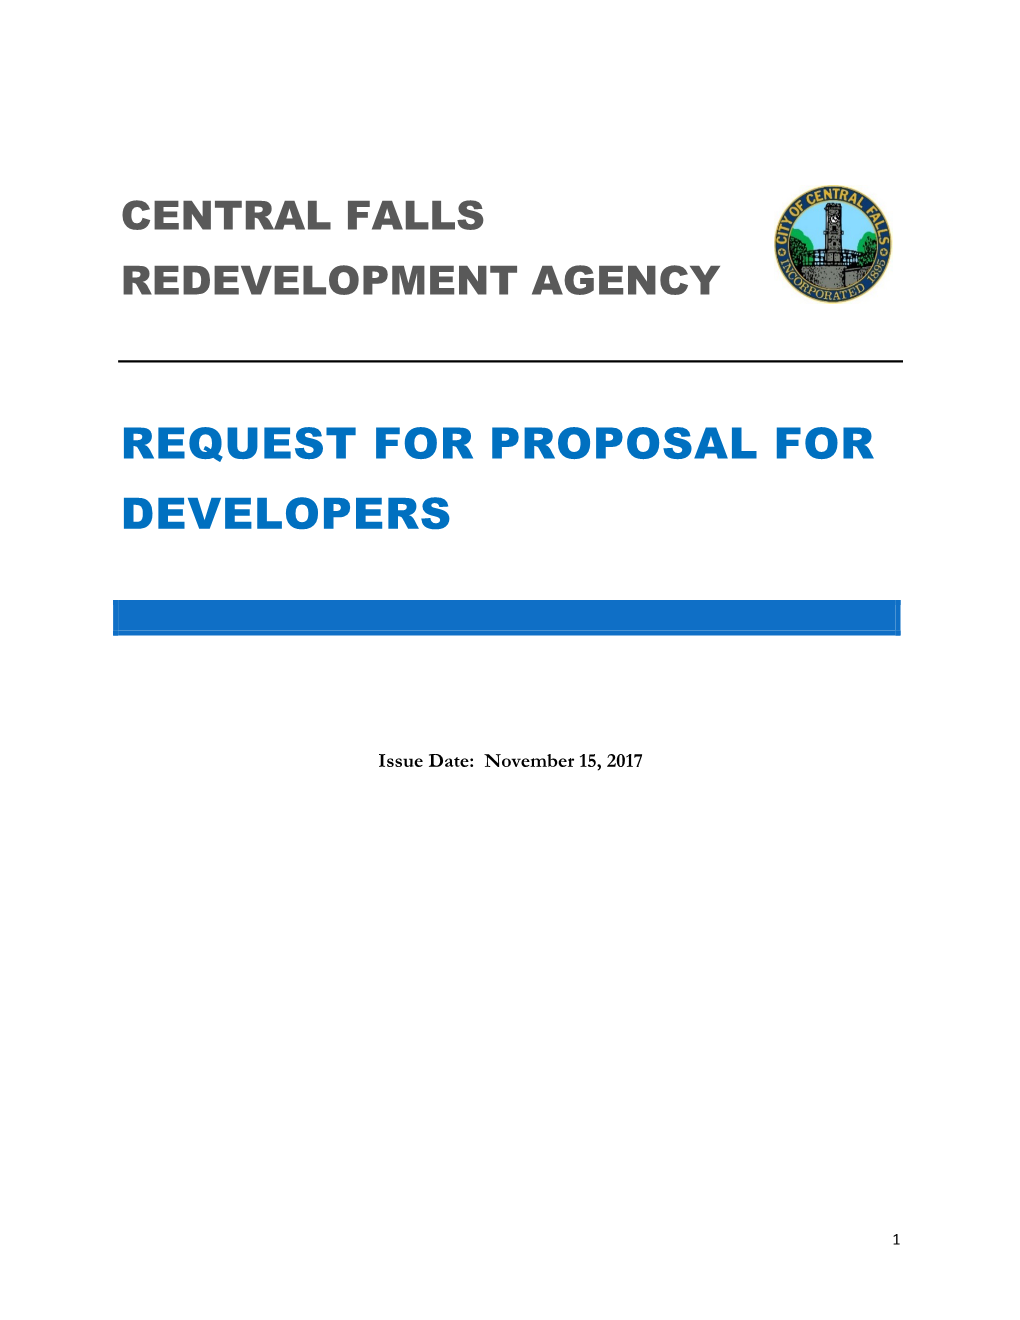 Request for Proposal for Developers